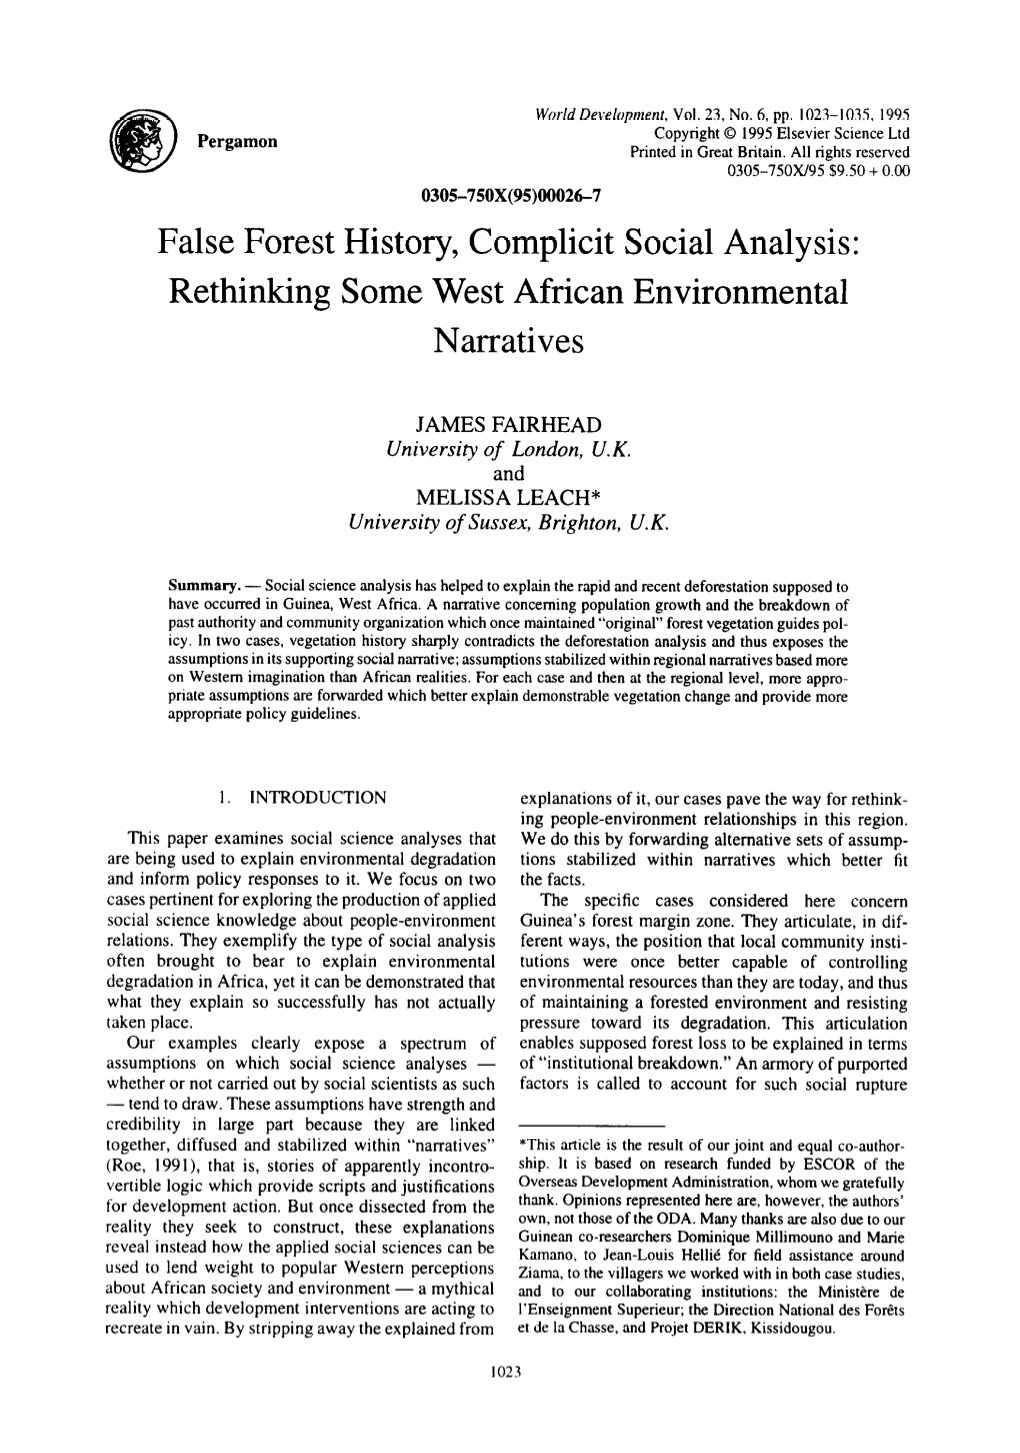 False Forest History, Complicit Social Analysis: Rethinking Some West African Environmental Narratives